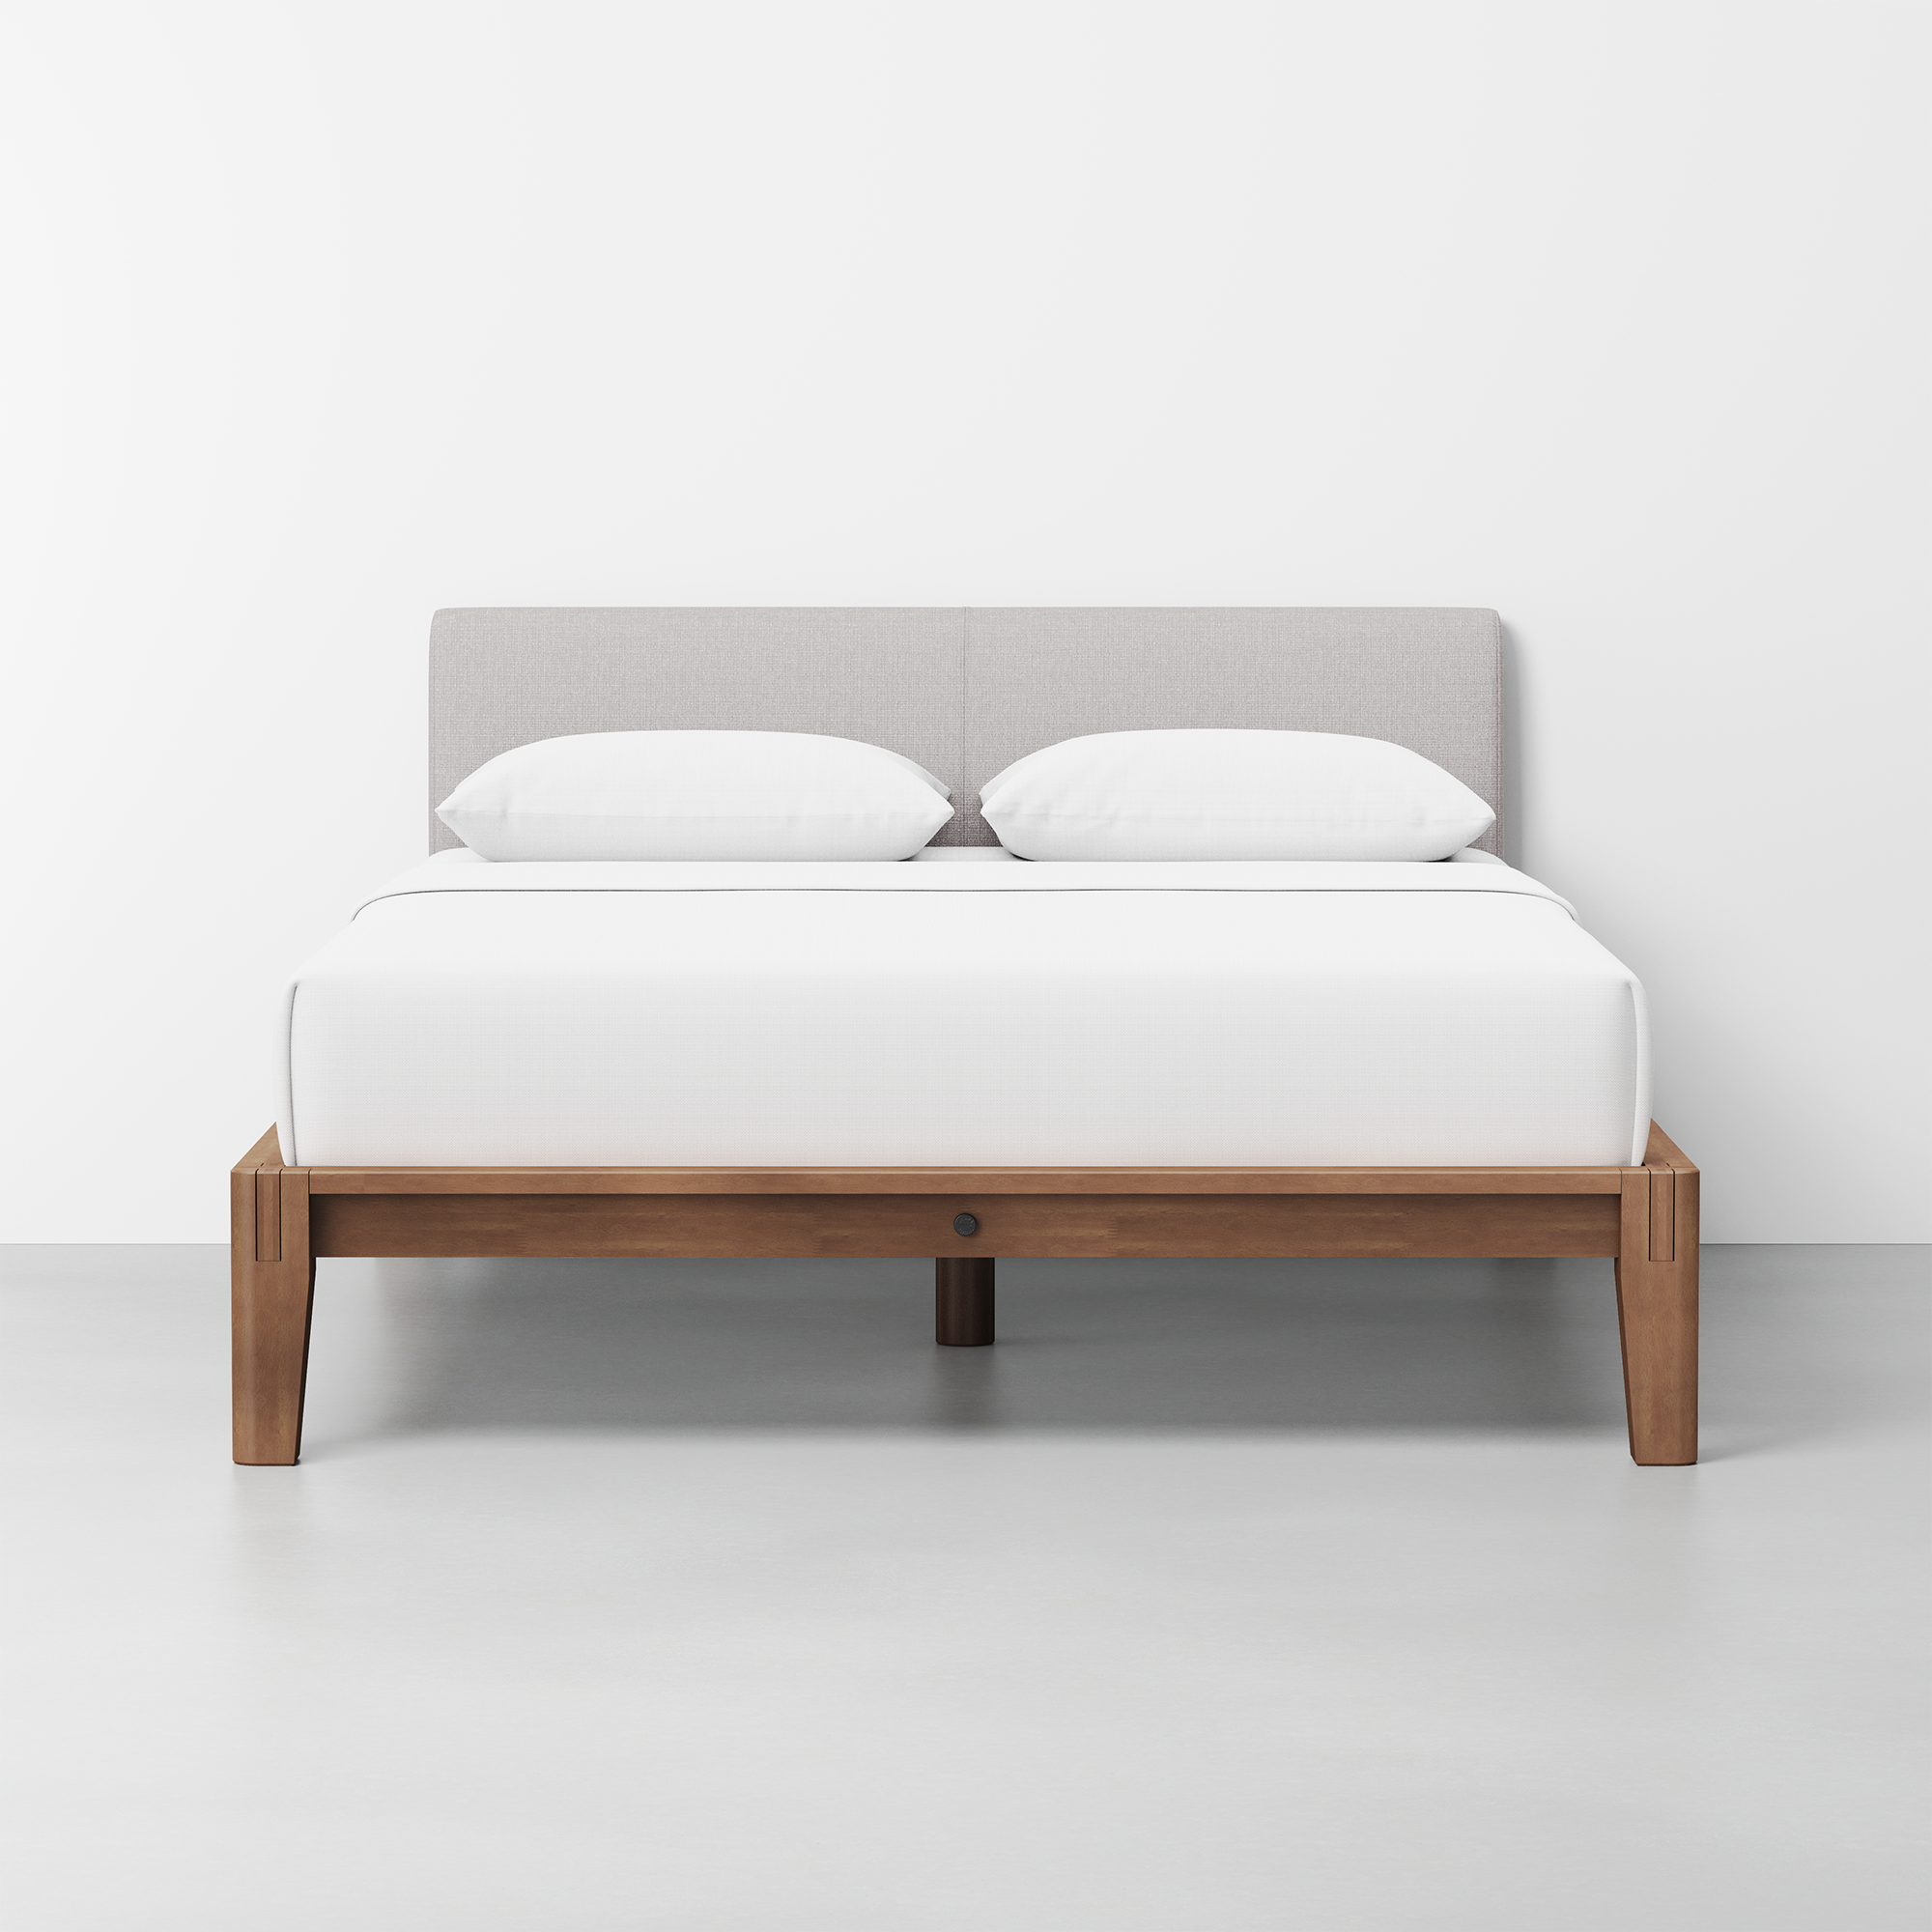 The PillowBoard Cover (Walnut / Fog Grey) - Render - Front